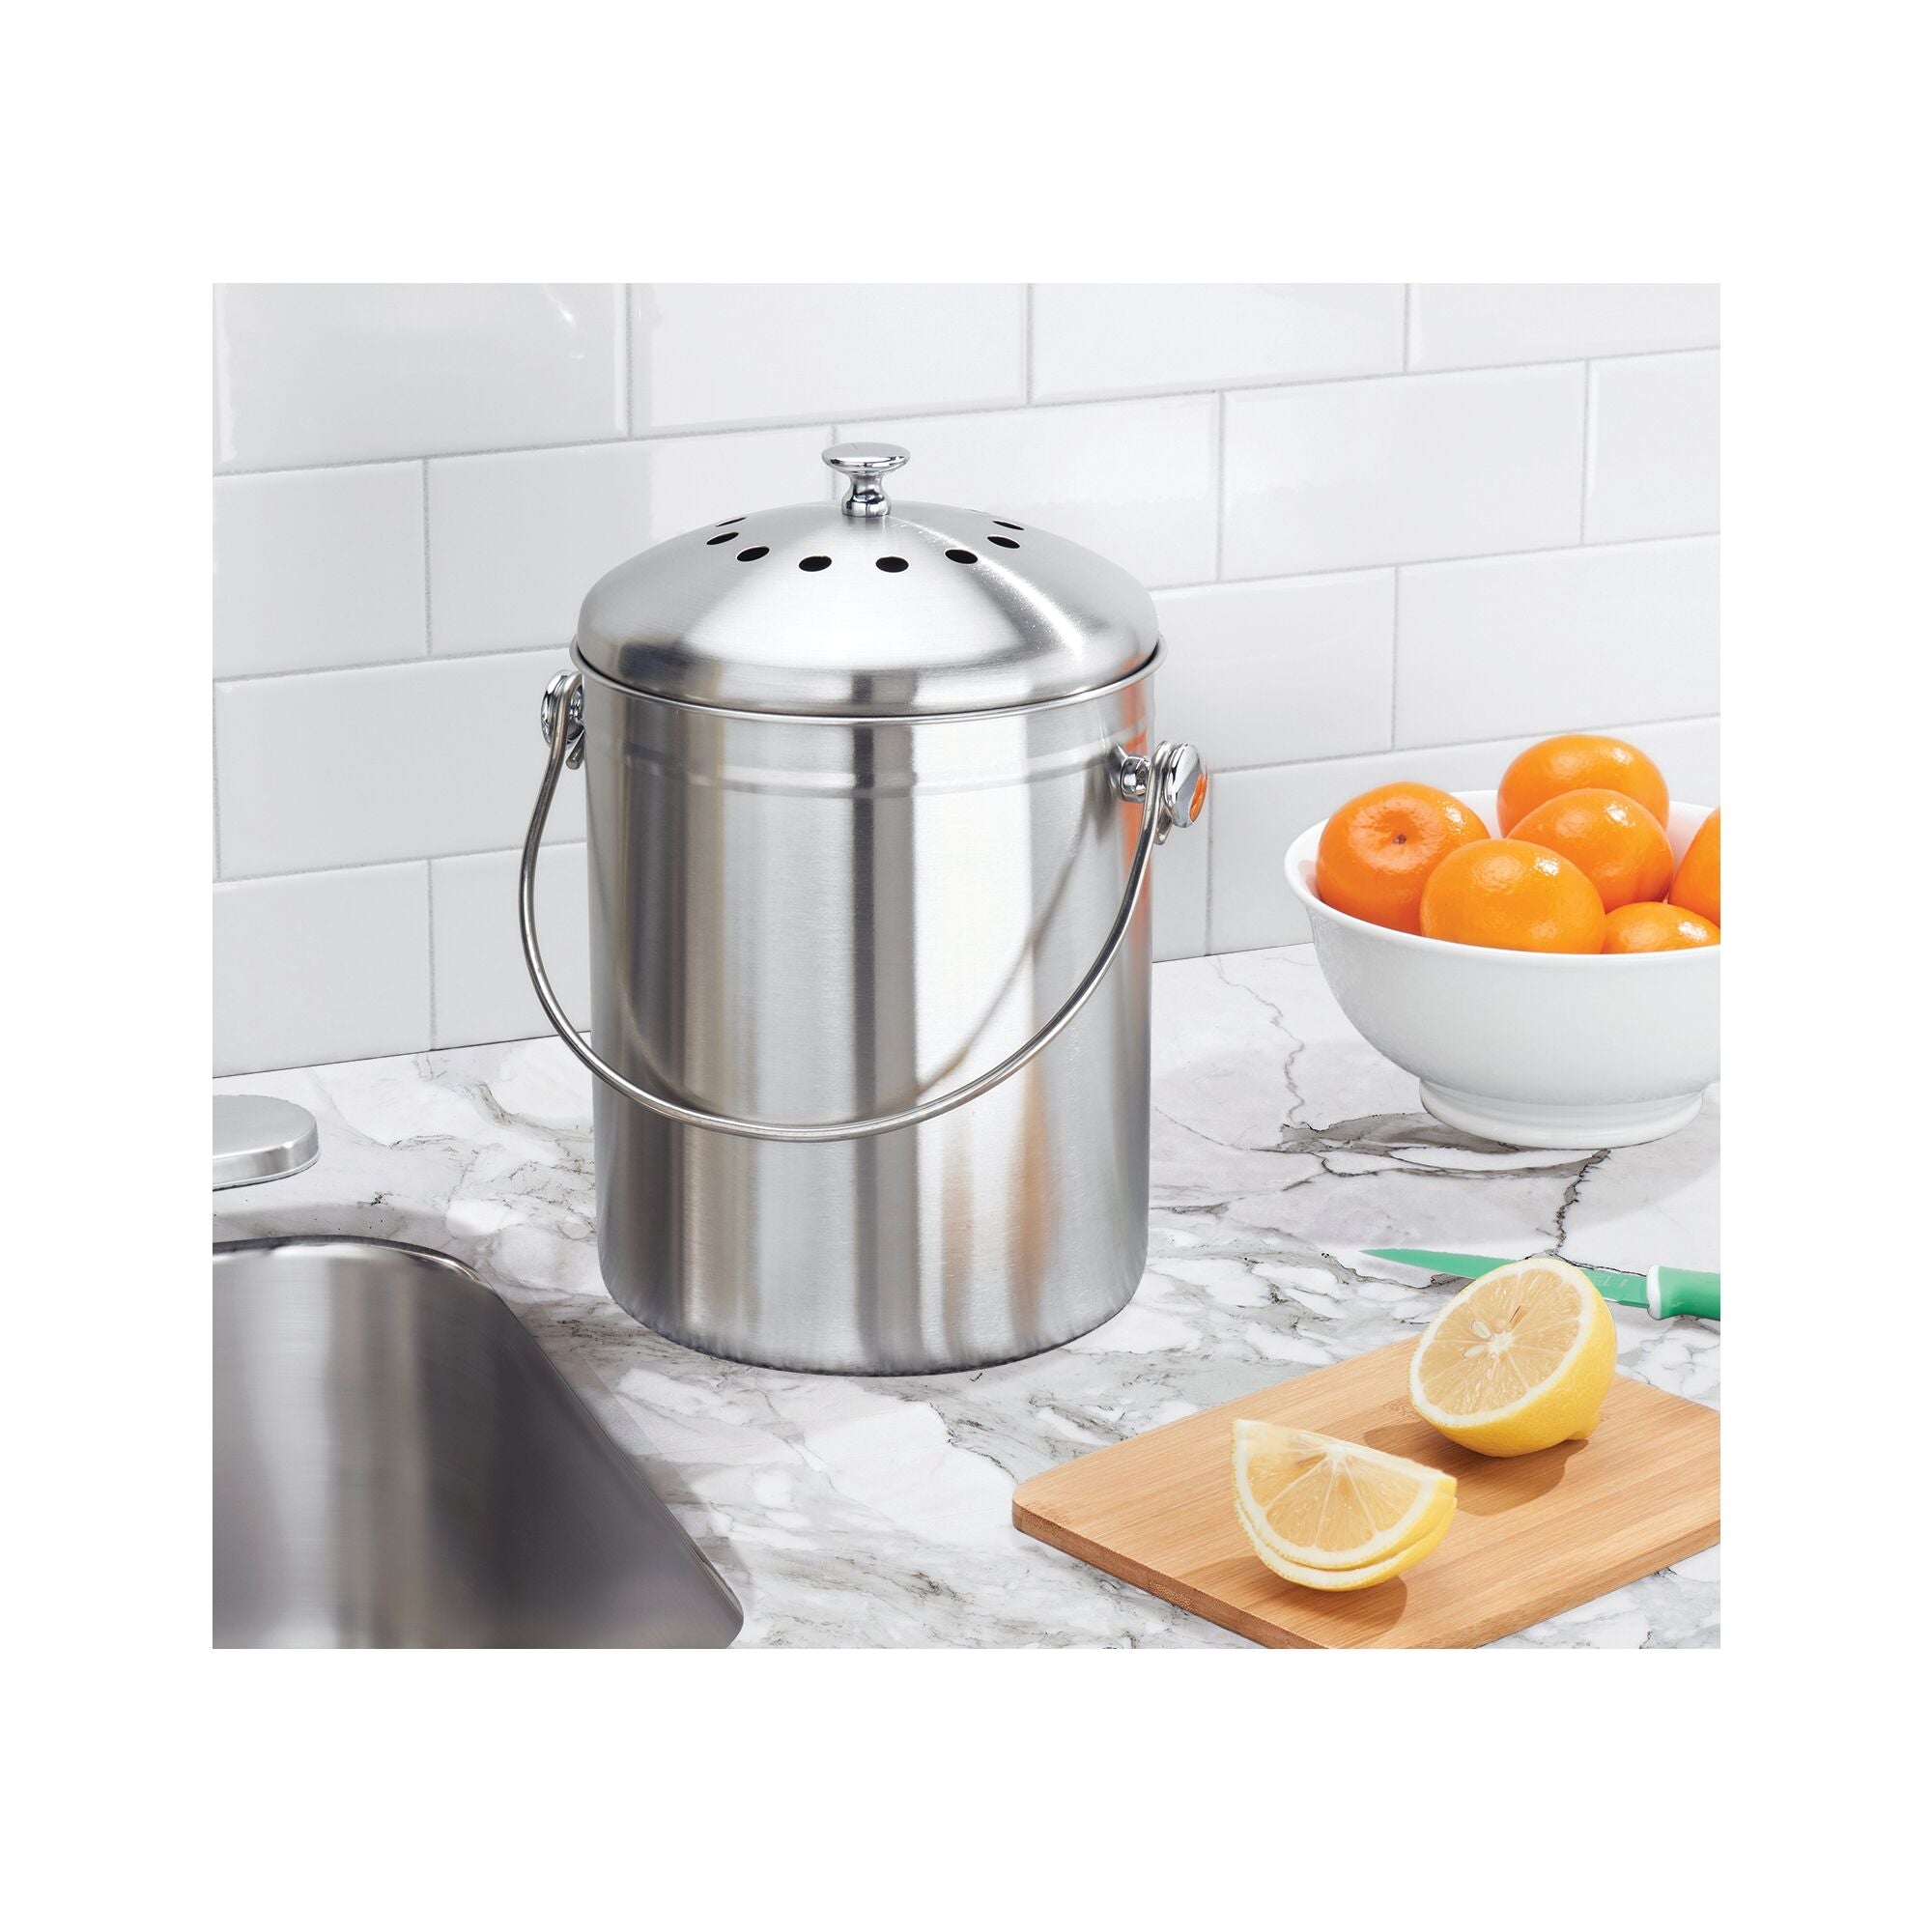 Countertop Compost Bin | Brushed Stainless Steel Compost Pail